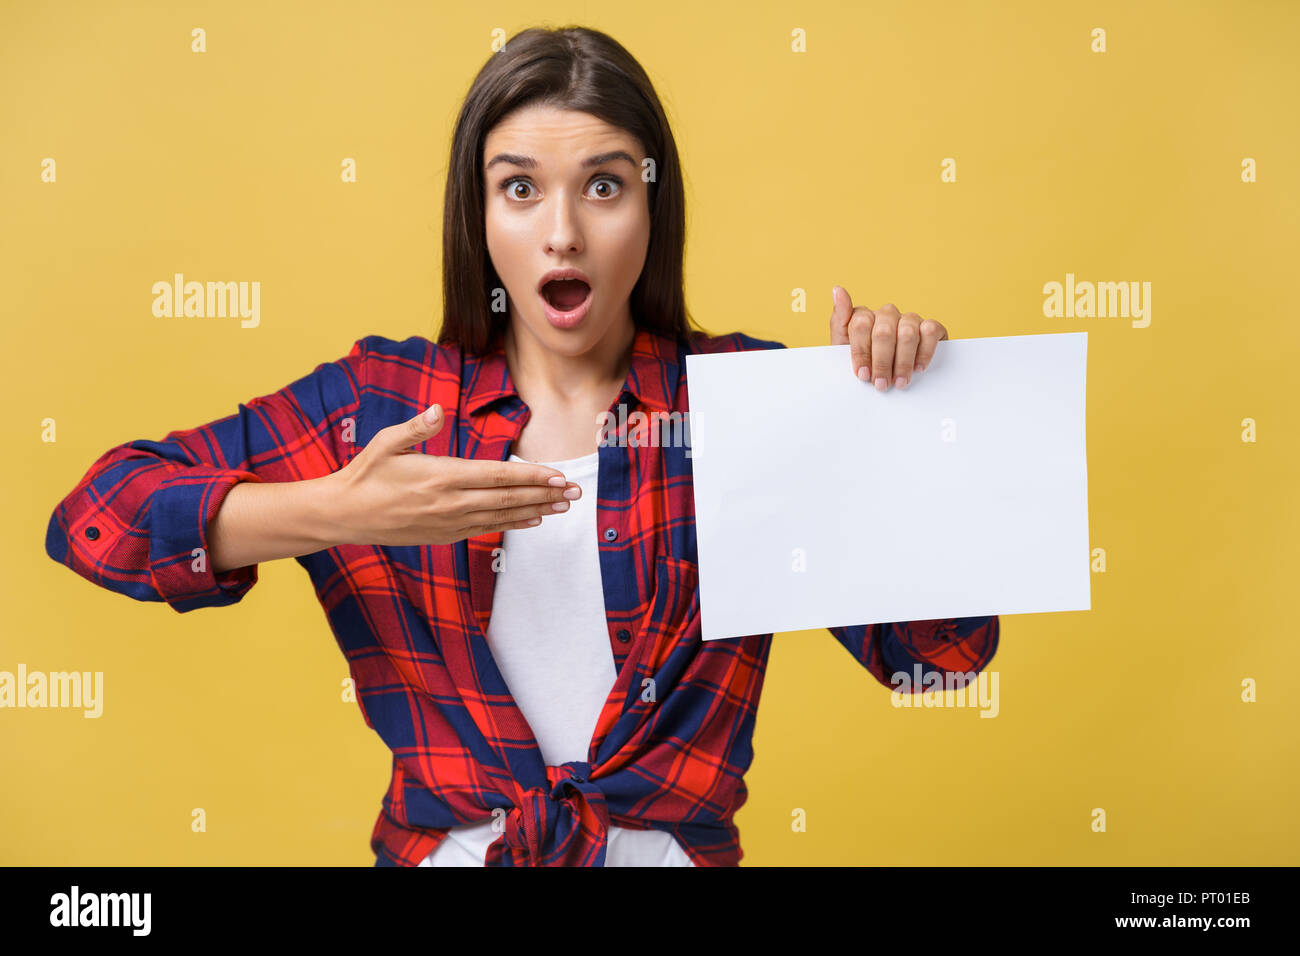 Amazement or surprised female with blank white panel, isolated on yellow background. Stock Photo